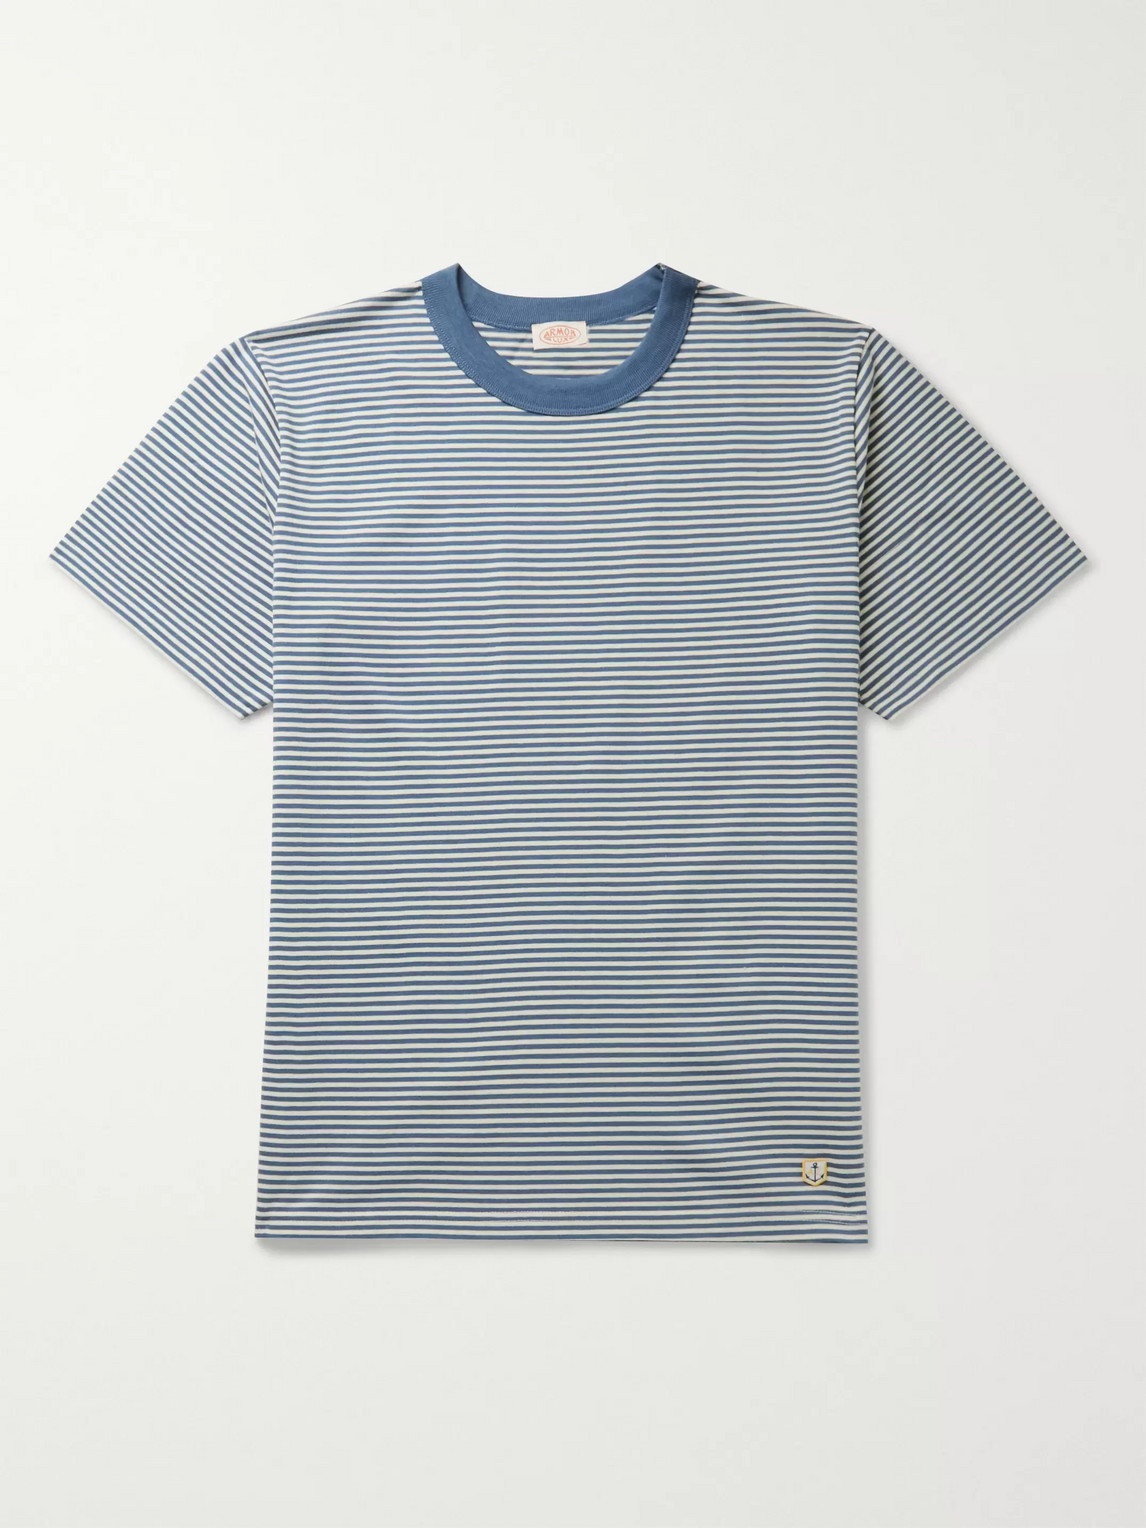 Armor-lux Striped Cotton-jersey T-shirt In Blue